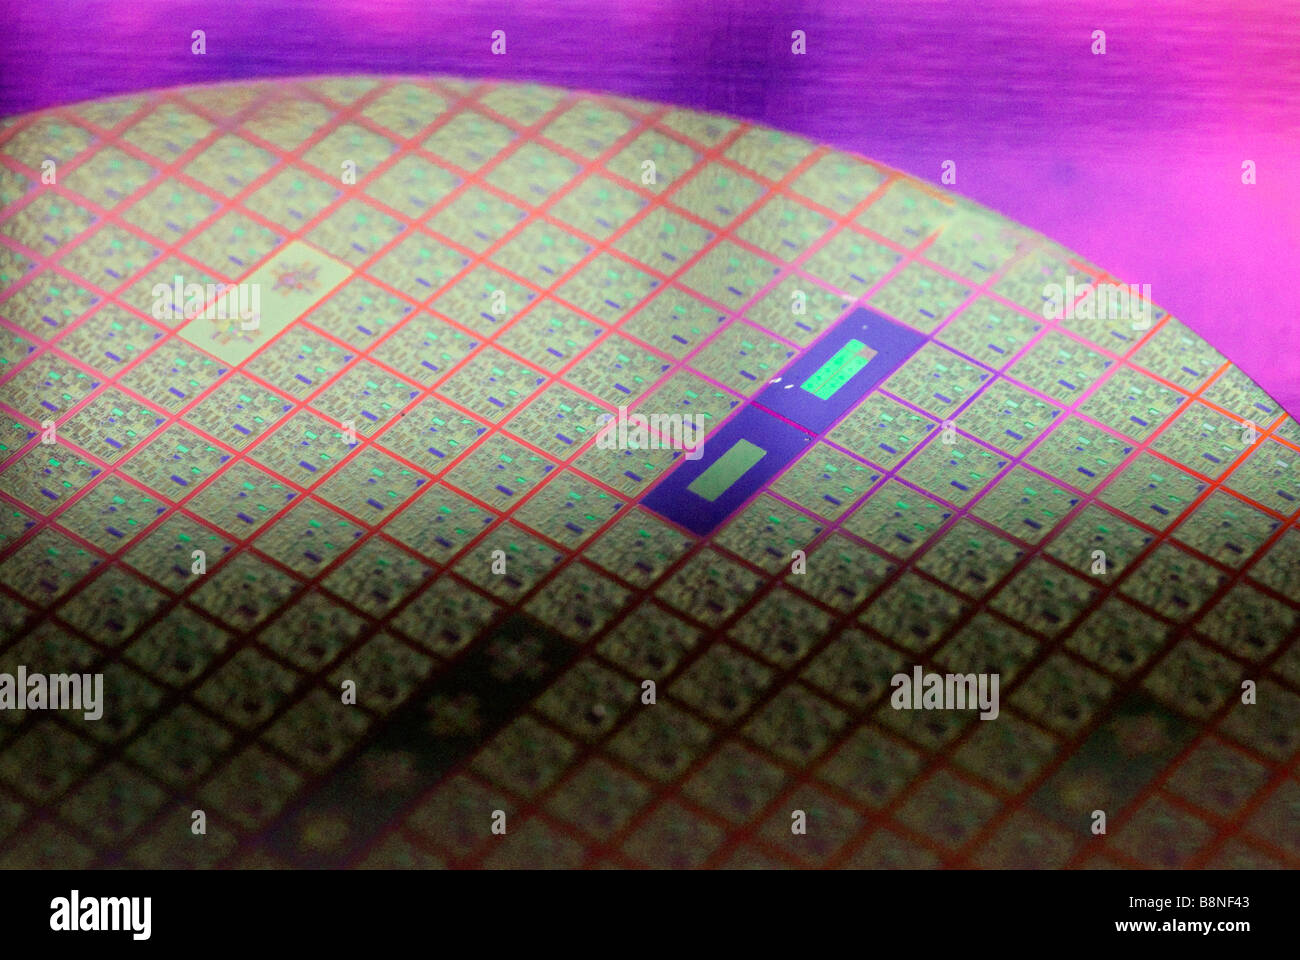 Semiconductor silicon computer wafer containing multiple microchip circuits prior to being cut into individual computer chips. Stock Photo